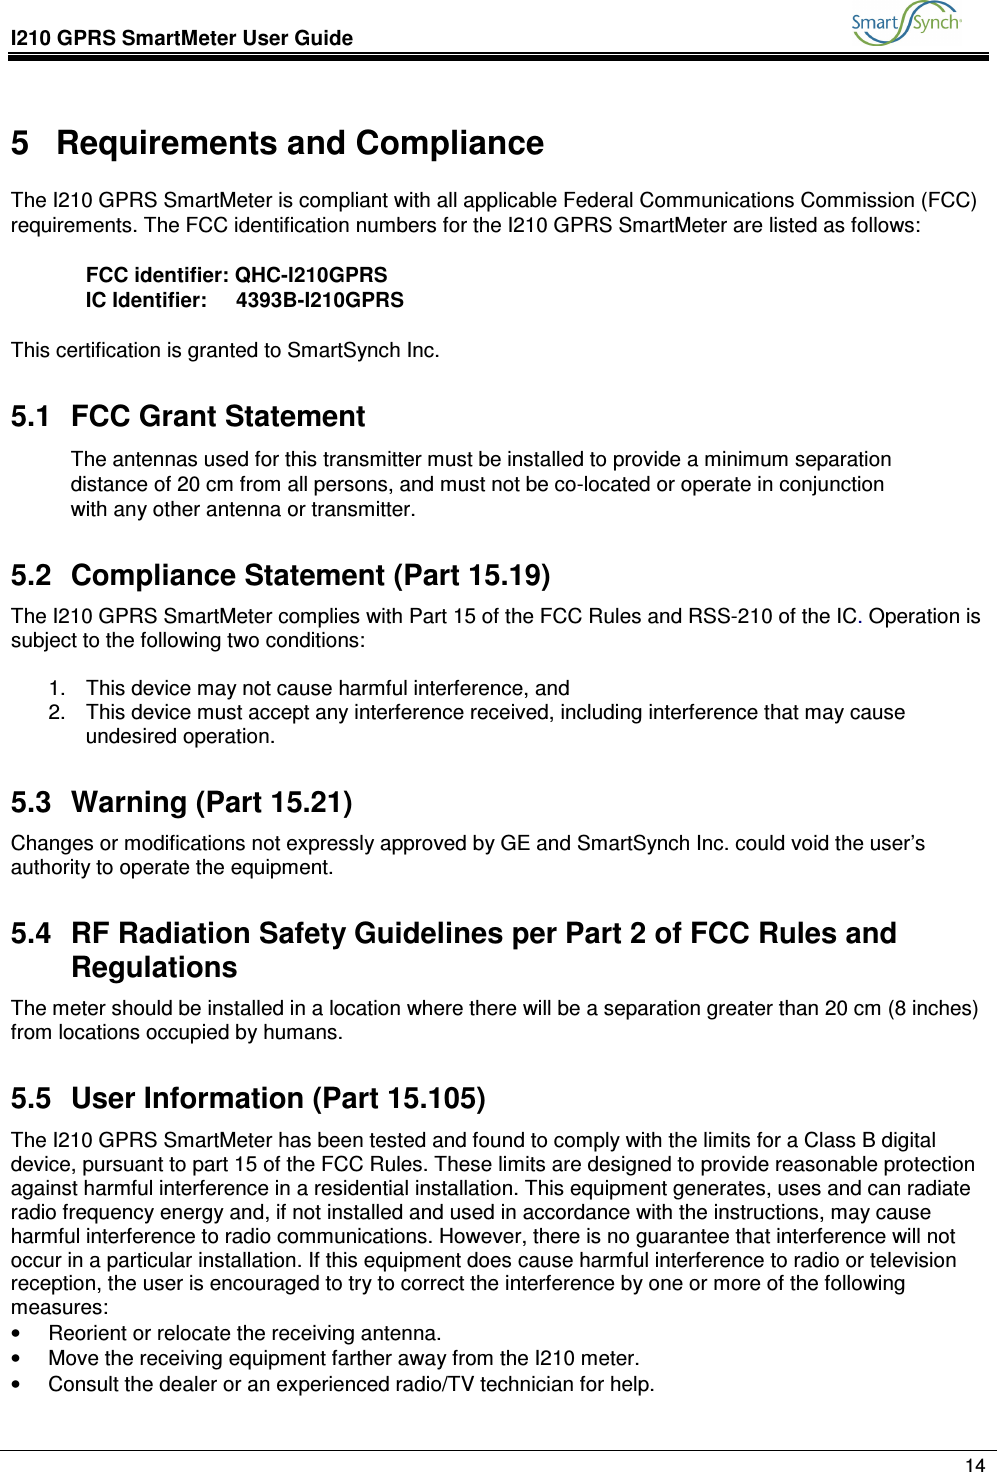 I210 GPRS SmartMeter User Guide               14  5  Requirements and Compliance The I210 GPRS SmartMeter is compliant with all applicable Federal Communications Commission (FCC) requirements. The FCC identification numbers for the I210 GPRS SmartMeter are listed as follows:  FCC identifier: QHC-I210GPRS IC Identifier:     4393B-I210GPRS  This certification is granted to SmartSynch Inc. 5.1  FCC Grant Statement The antennas used for this transmitter must be installed to provide a minimum separation distance of 20 cm from all persons, and must not be co-located or operate in conjunction with any other antenna or transmitter.  5.2  Compliance Statement (Part 15.19) The I210 GPRS SmartMeter complies with Part 15 of the FCC Rules and RSS-210 of the IC. Operation is subject to the following two conditions:  1.  This device may not cause harmful interference, and 2.  This device must accept any interference received, including interference that may cause undesired operation. 5.3  Warning (Part 15.21) Changes or modifications not expressly approved by GE and SmartSynch Inc. could void the user’s authority to operate the equipment. 5.4  RF Radiation Safety Guidelines per Part 2 of FCC Rules and Regulations The meter should be installed in a location where there will be a separation greater than 20 cm (8 inches) from locations occupied by humans. 5.5  User Information (Part 15.105) The I210 GPRS SmartMeter has been tested and found to comply with the limits for a Class B digital device, pursuant to part 15 of the FCC Rules. These limits are designed to provide reasonable protection against harmful interference in a residential installation. This equipment generates, uses and can radiate radio frequency energy and, if not installed and used in accordance with the instructions, may cause harmful interference to radio communications. However, there is no guarantee that interference will not occur in a particular installation. If this equipment does cause harmful interference to radio or television reception, the user is encouraged to try to correct the interference by one or more of the following measures: •  Reorient or relocate the receiving antenna. •  Move the receiving equipment farther away from the I210 meter. •  Consult the dealer or an experienced radio/TV technician for help.  